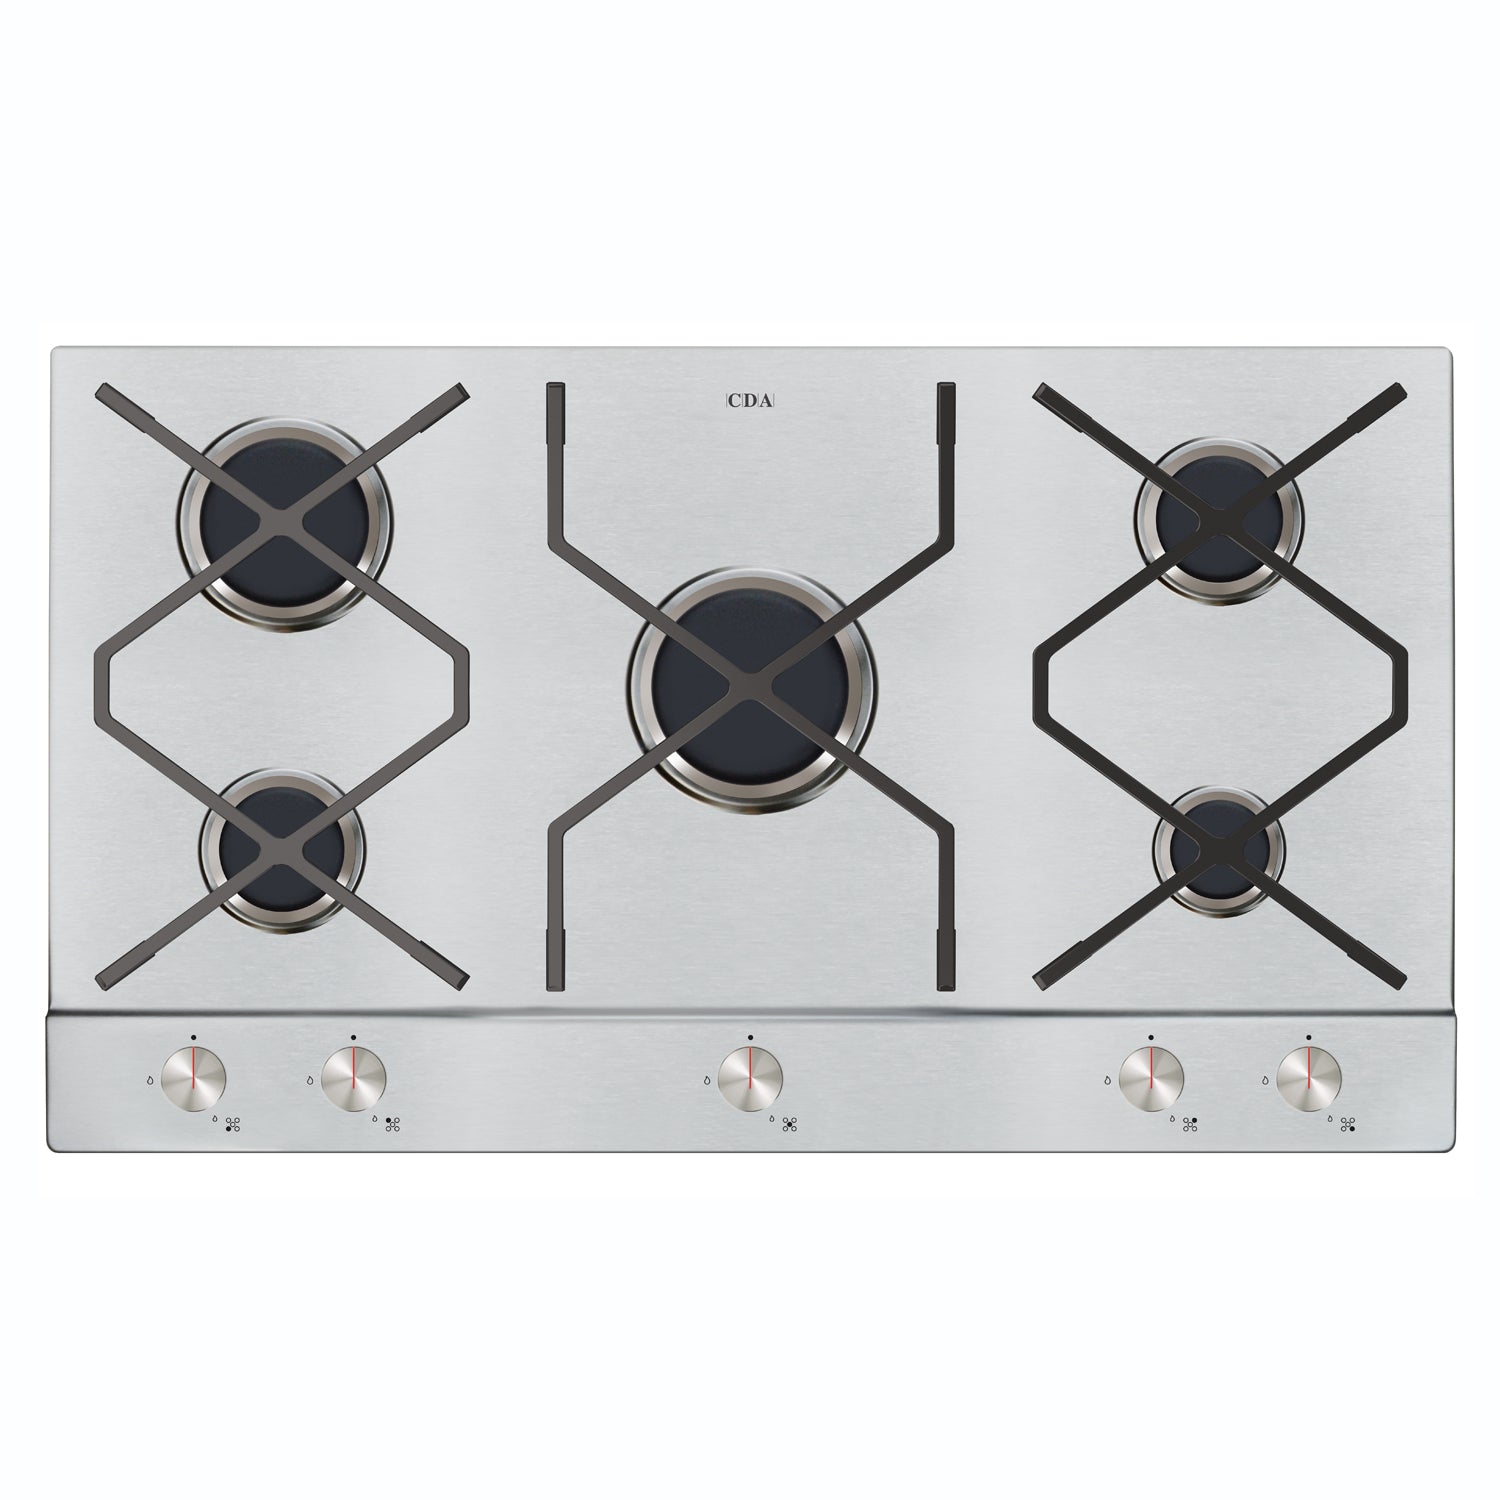 Cda Hvg970ss Designer Five Burner 90cm Gas Hob Stainless Steel One Only To Clear At This Price